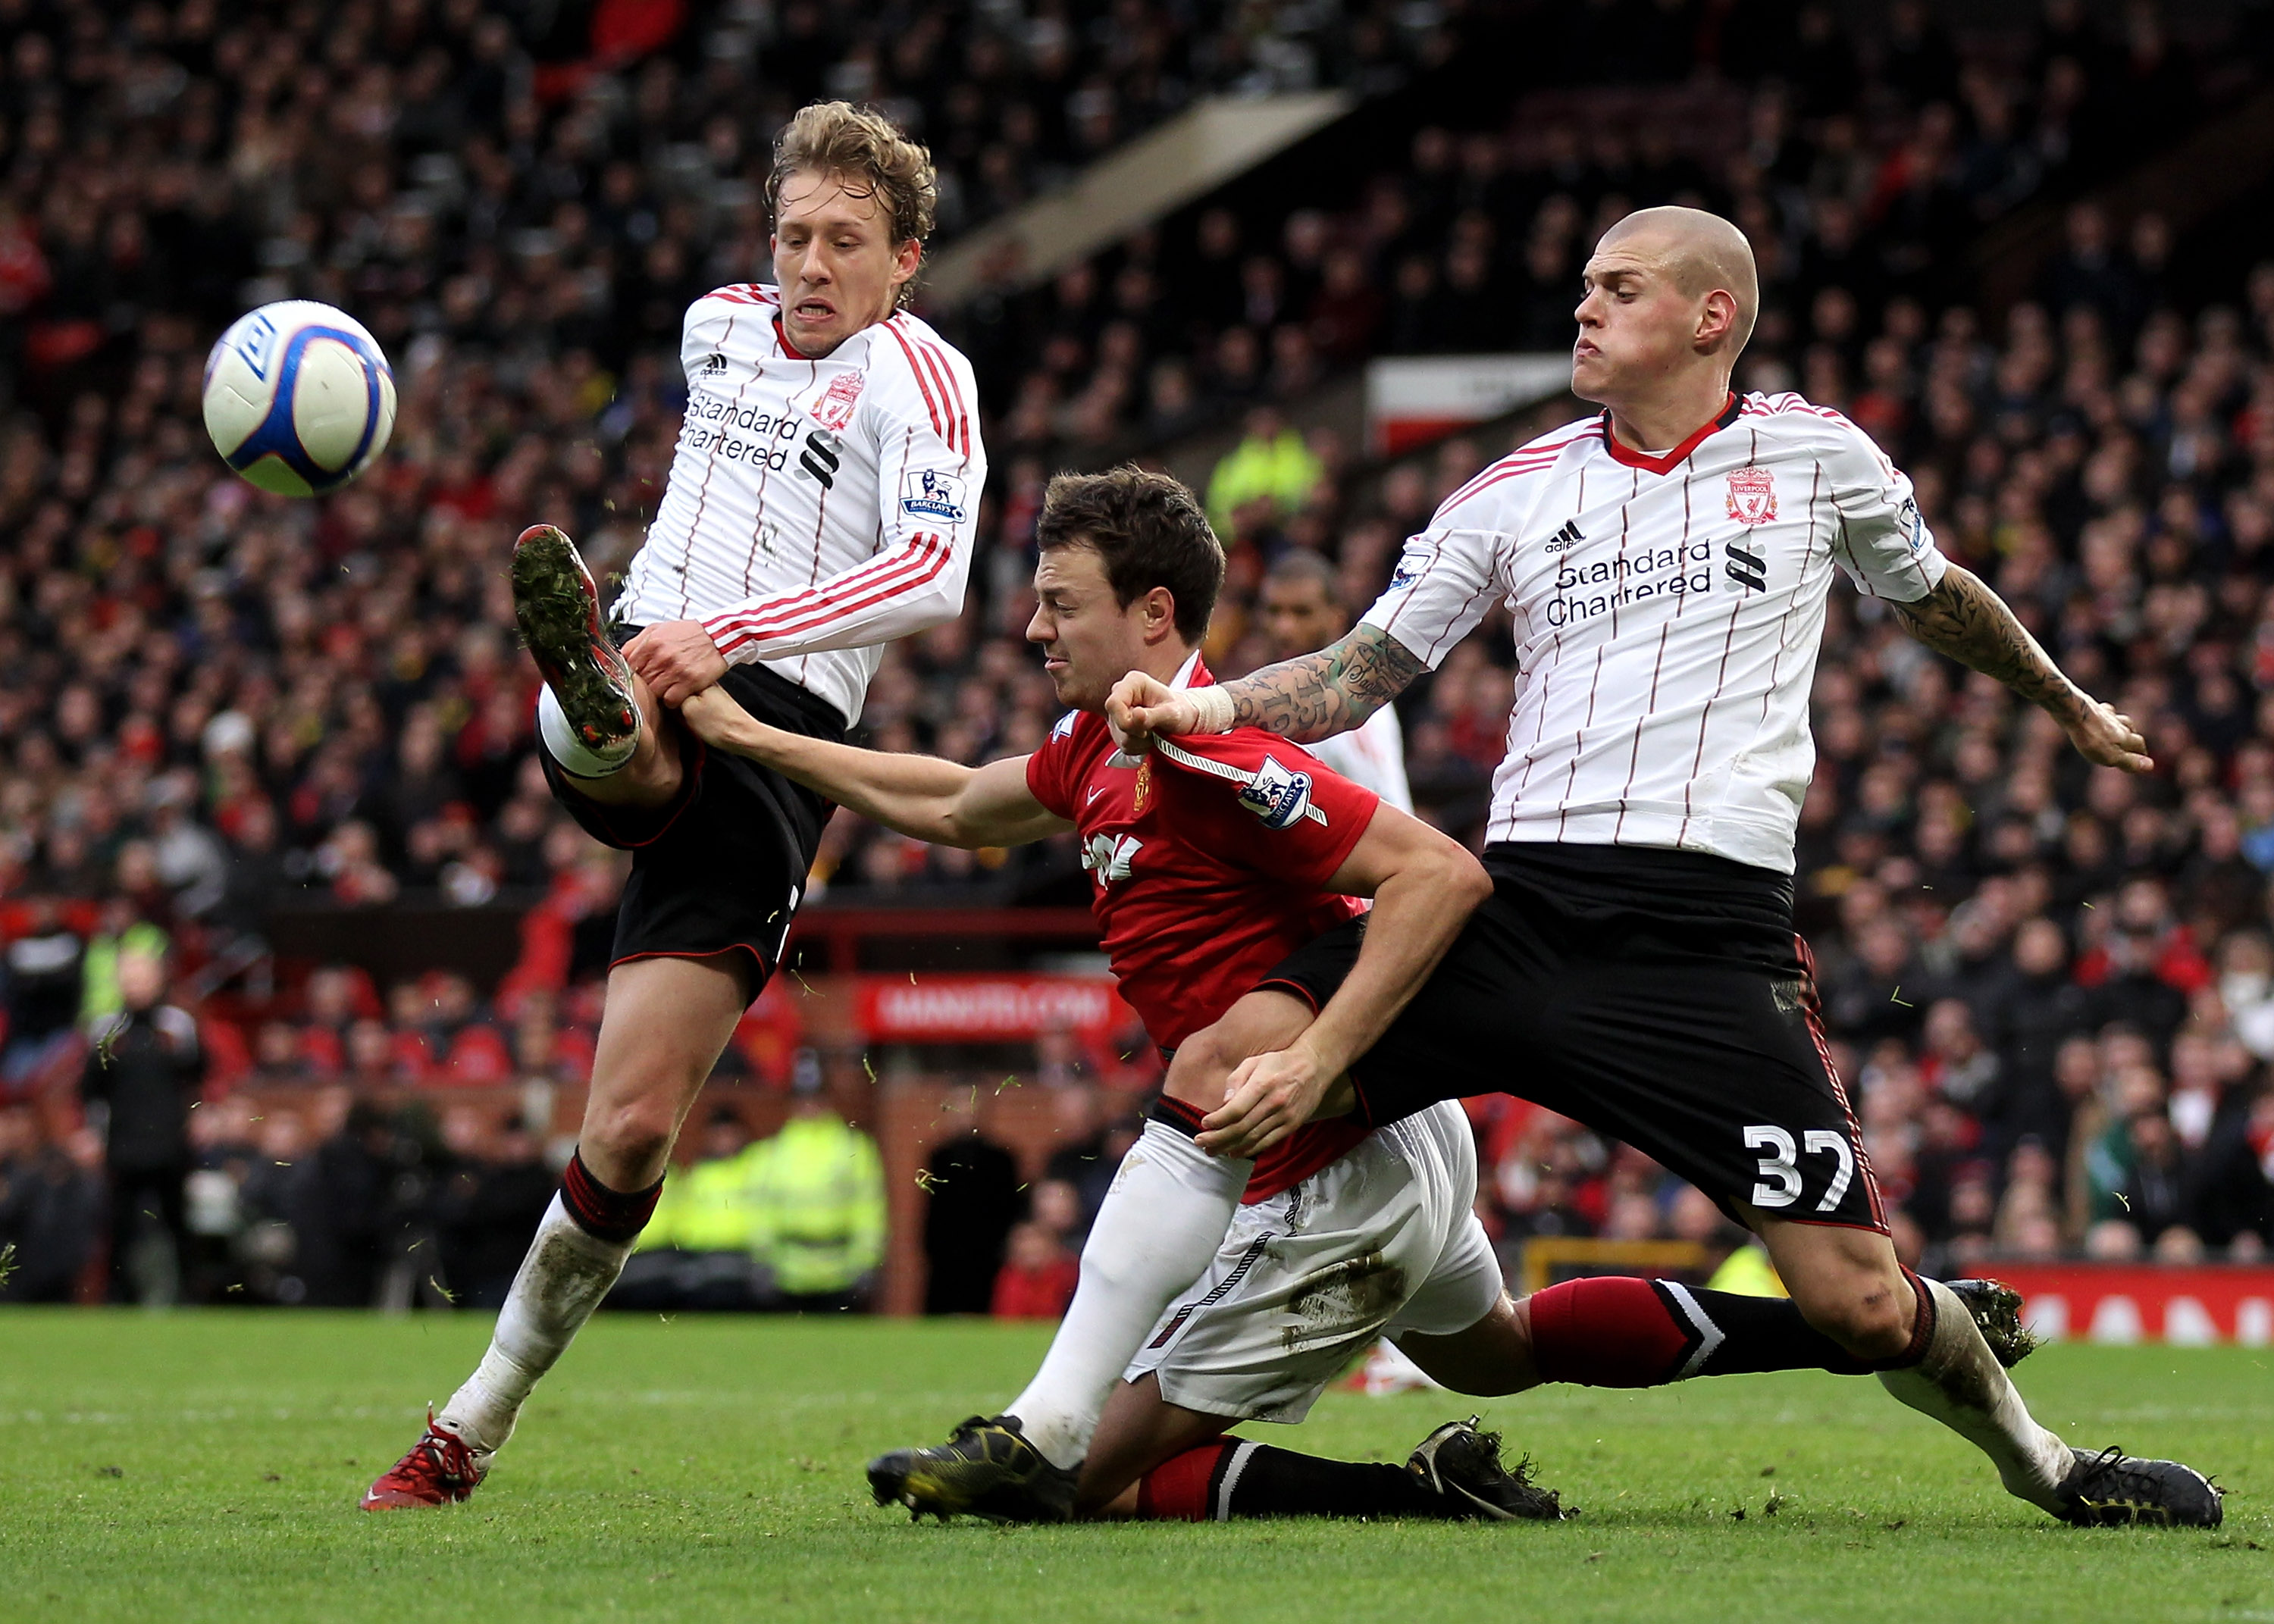 MANCHESTER, ENGLAND - JANUARY 09:  Jonny Evans of Manchester United tangles with Martin Skrtel of Liverpool in the penalty area during the FA Cup sponsored by E.ON 3rd round match between Manchester United and Liverpool at Old Trafford on January 9, 2011